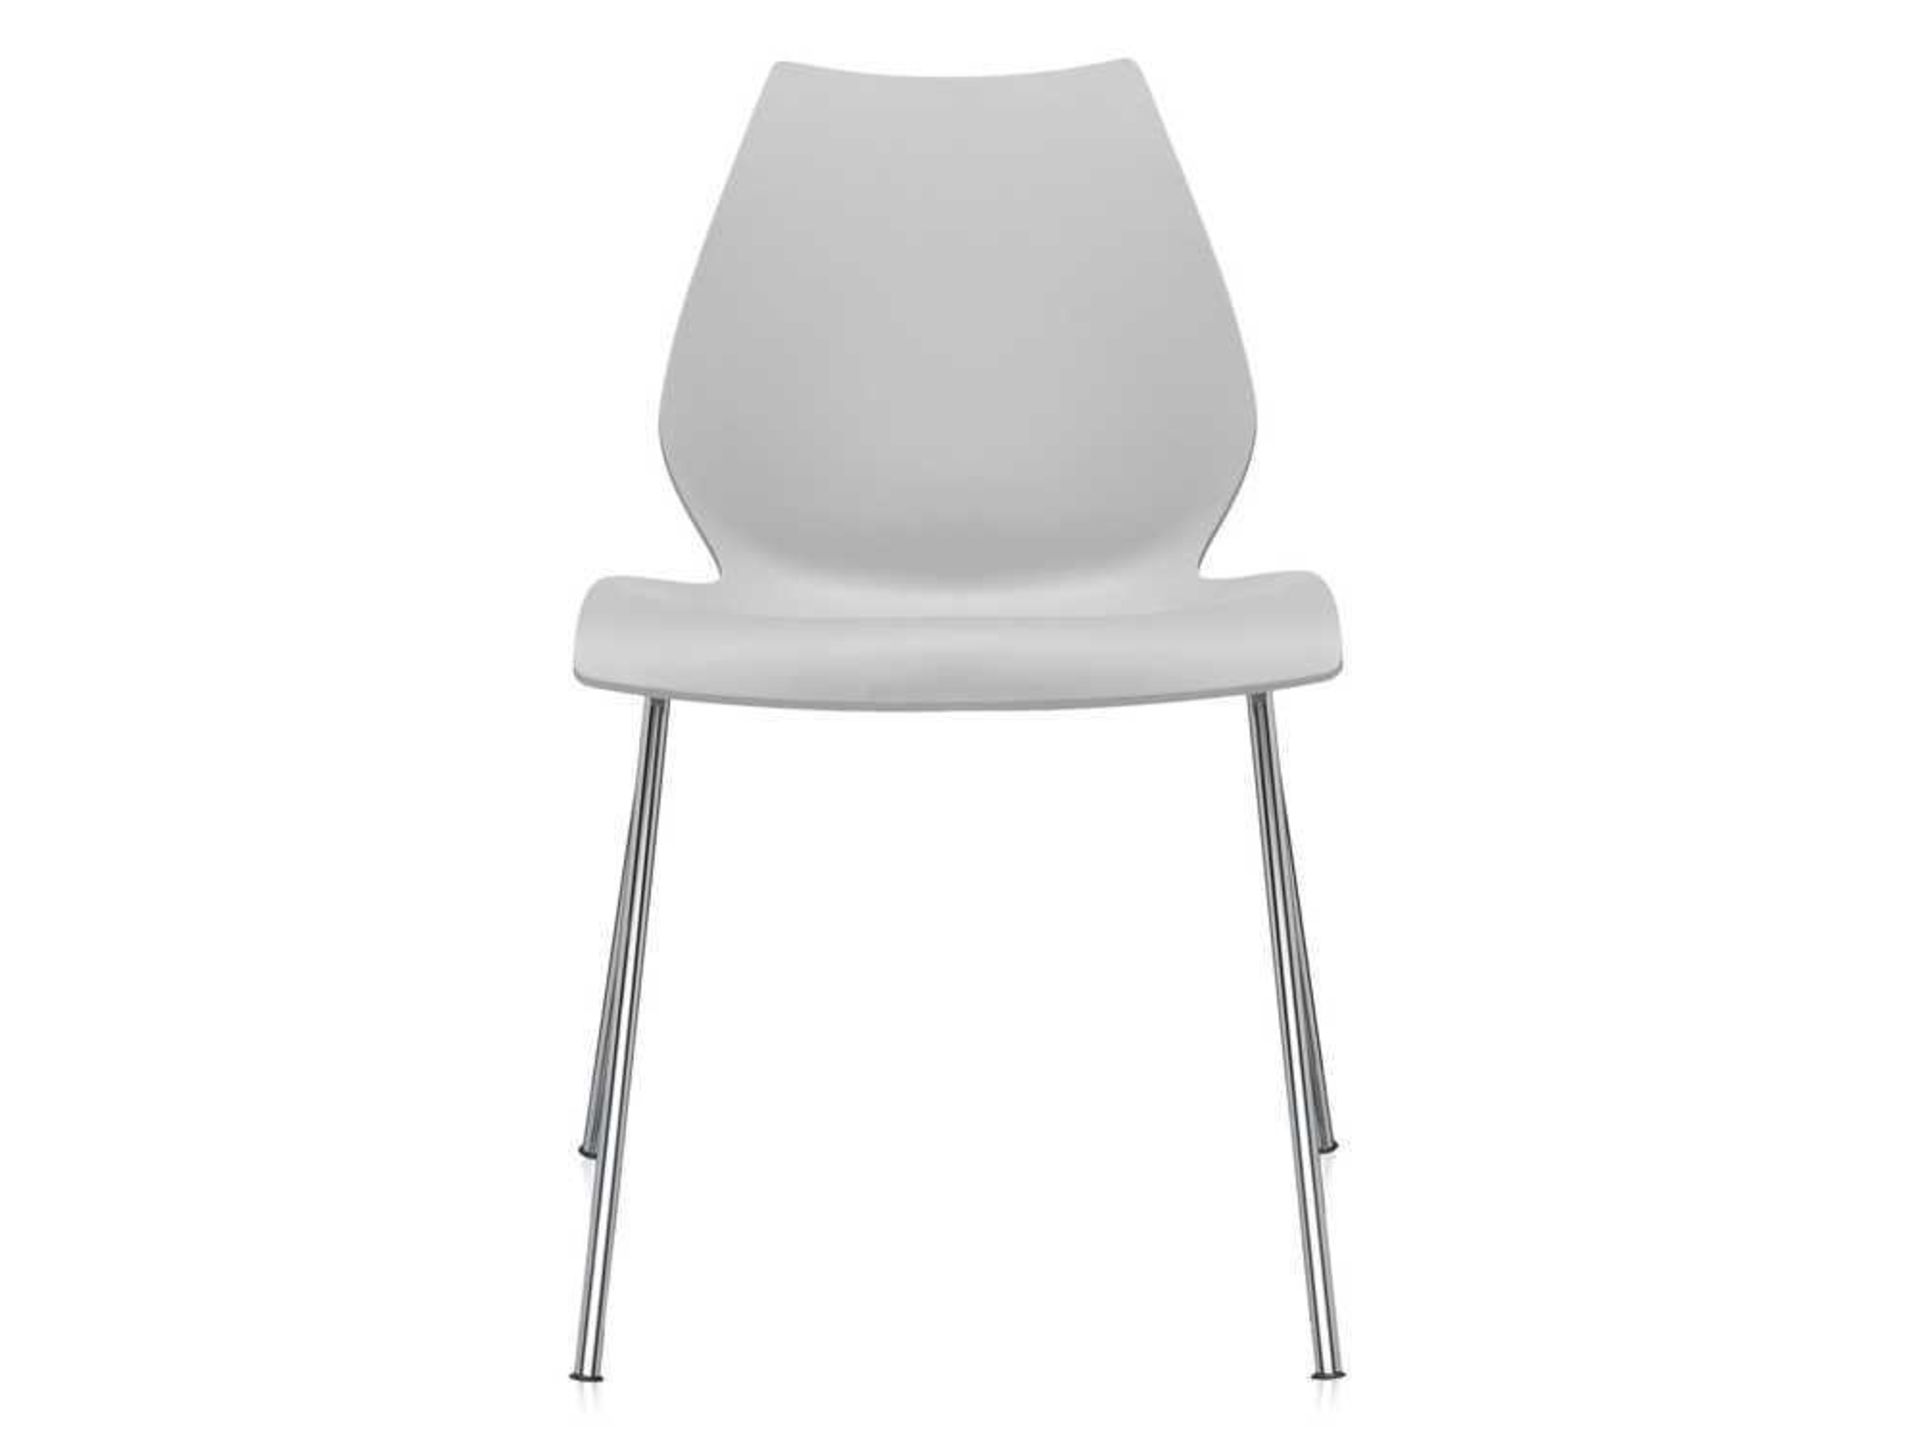 RRP £200 - Boxed 2 'Maui' Grey Dining Chairs